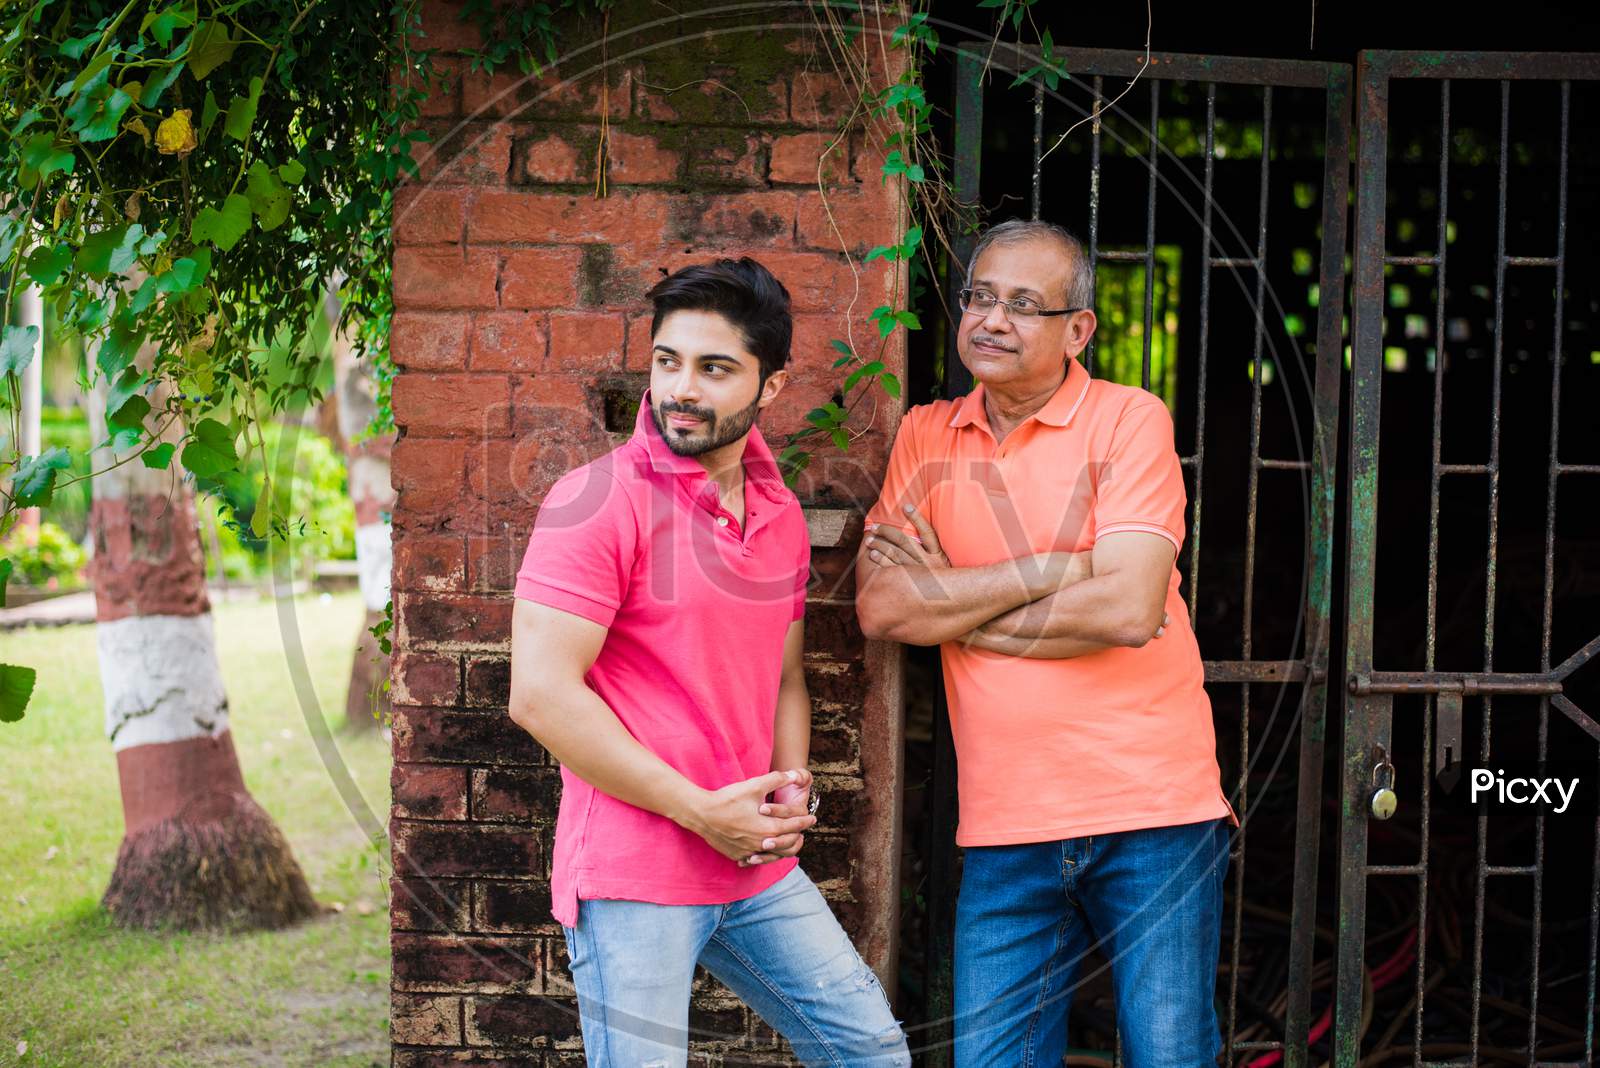 Young Man with Father posing against red brick wall, outdoor